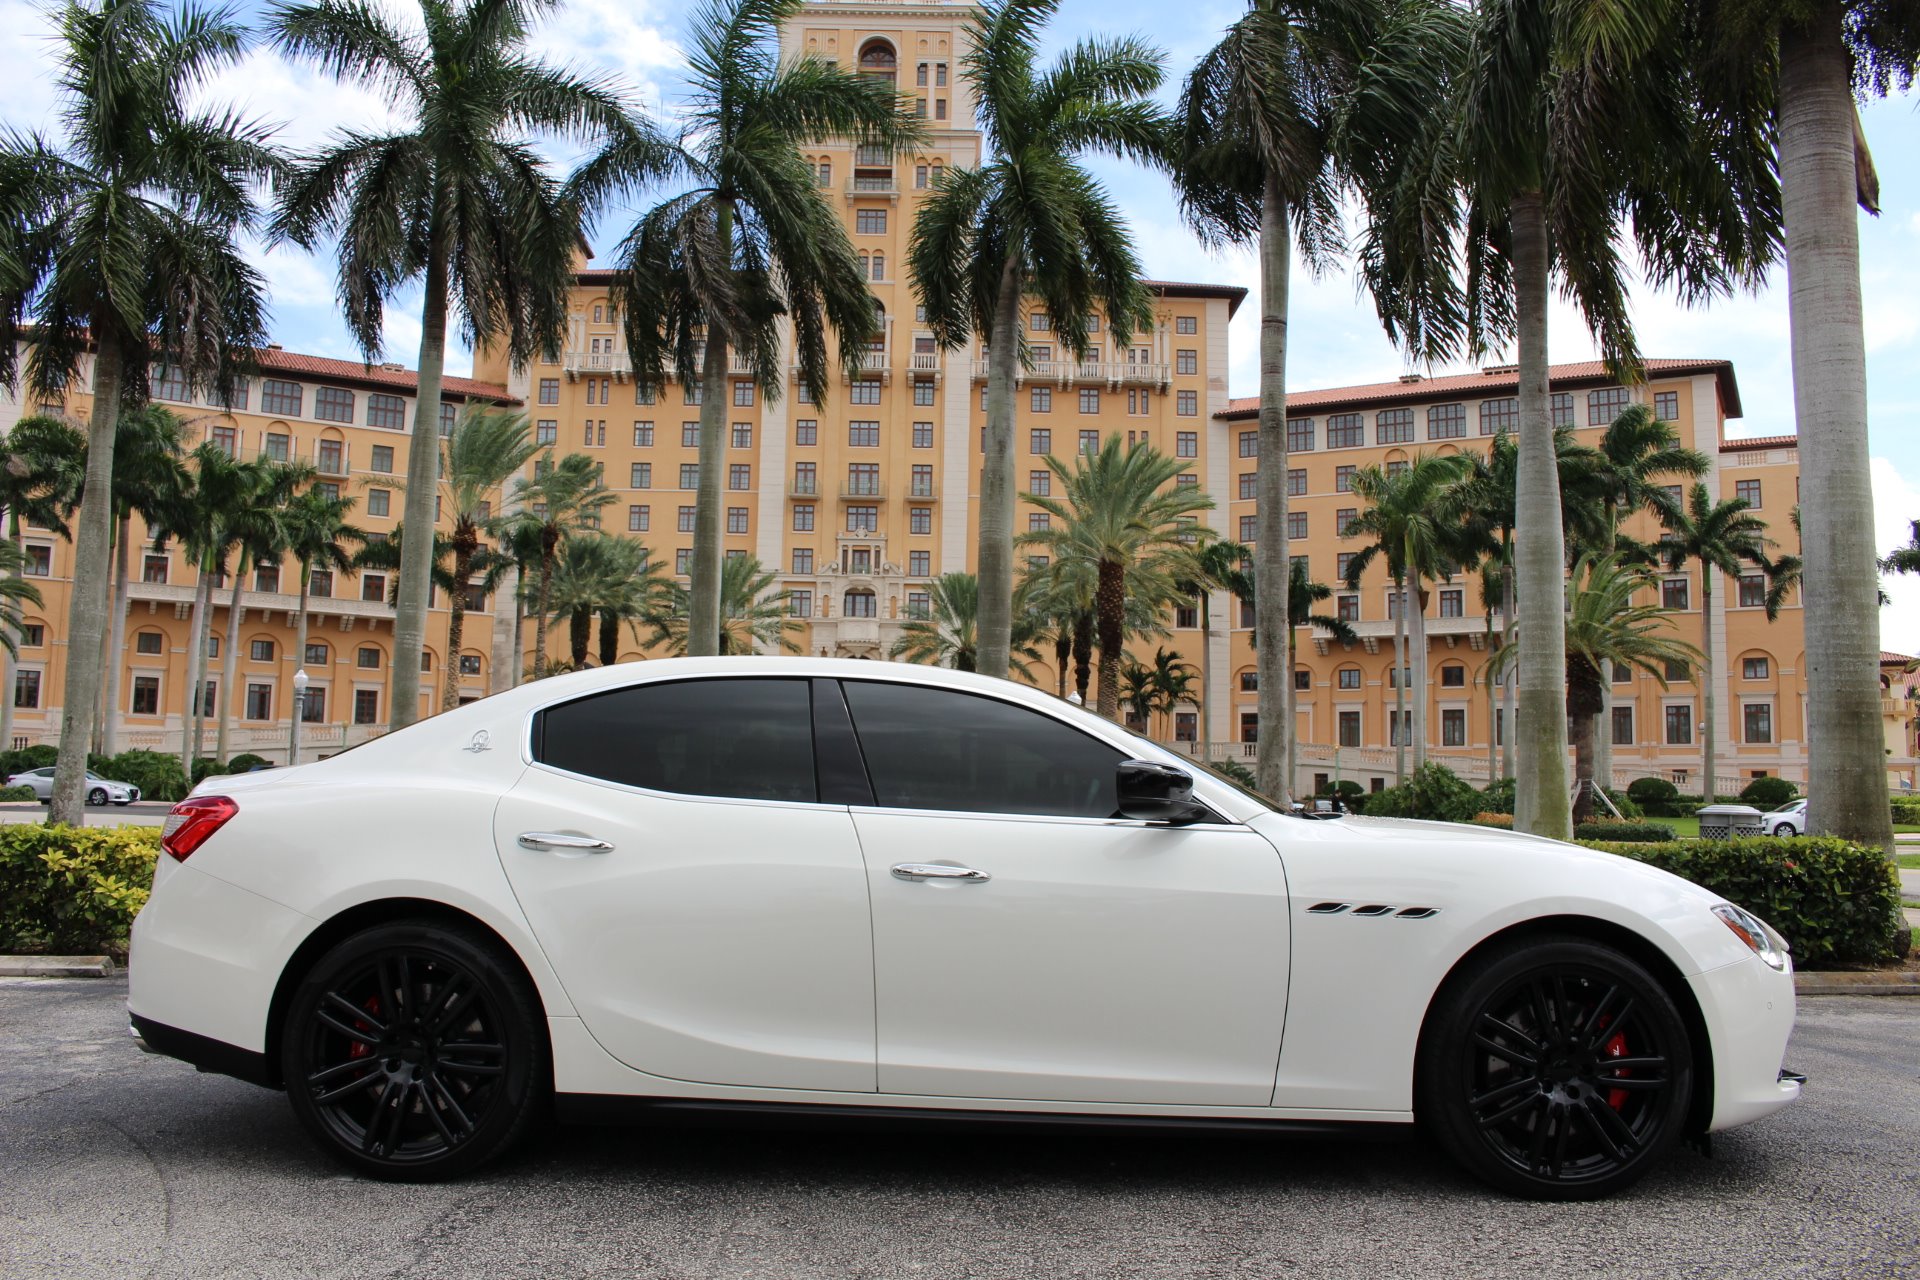 Used 2016 Maserati Ghibli S For Sale ($32,850) | The Gables Sports Cars  Stock #168556